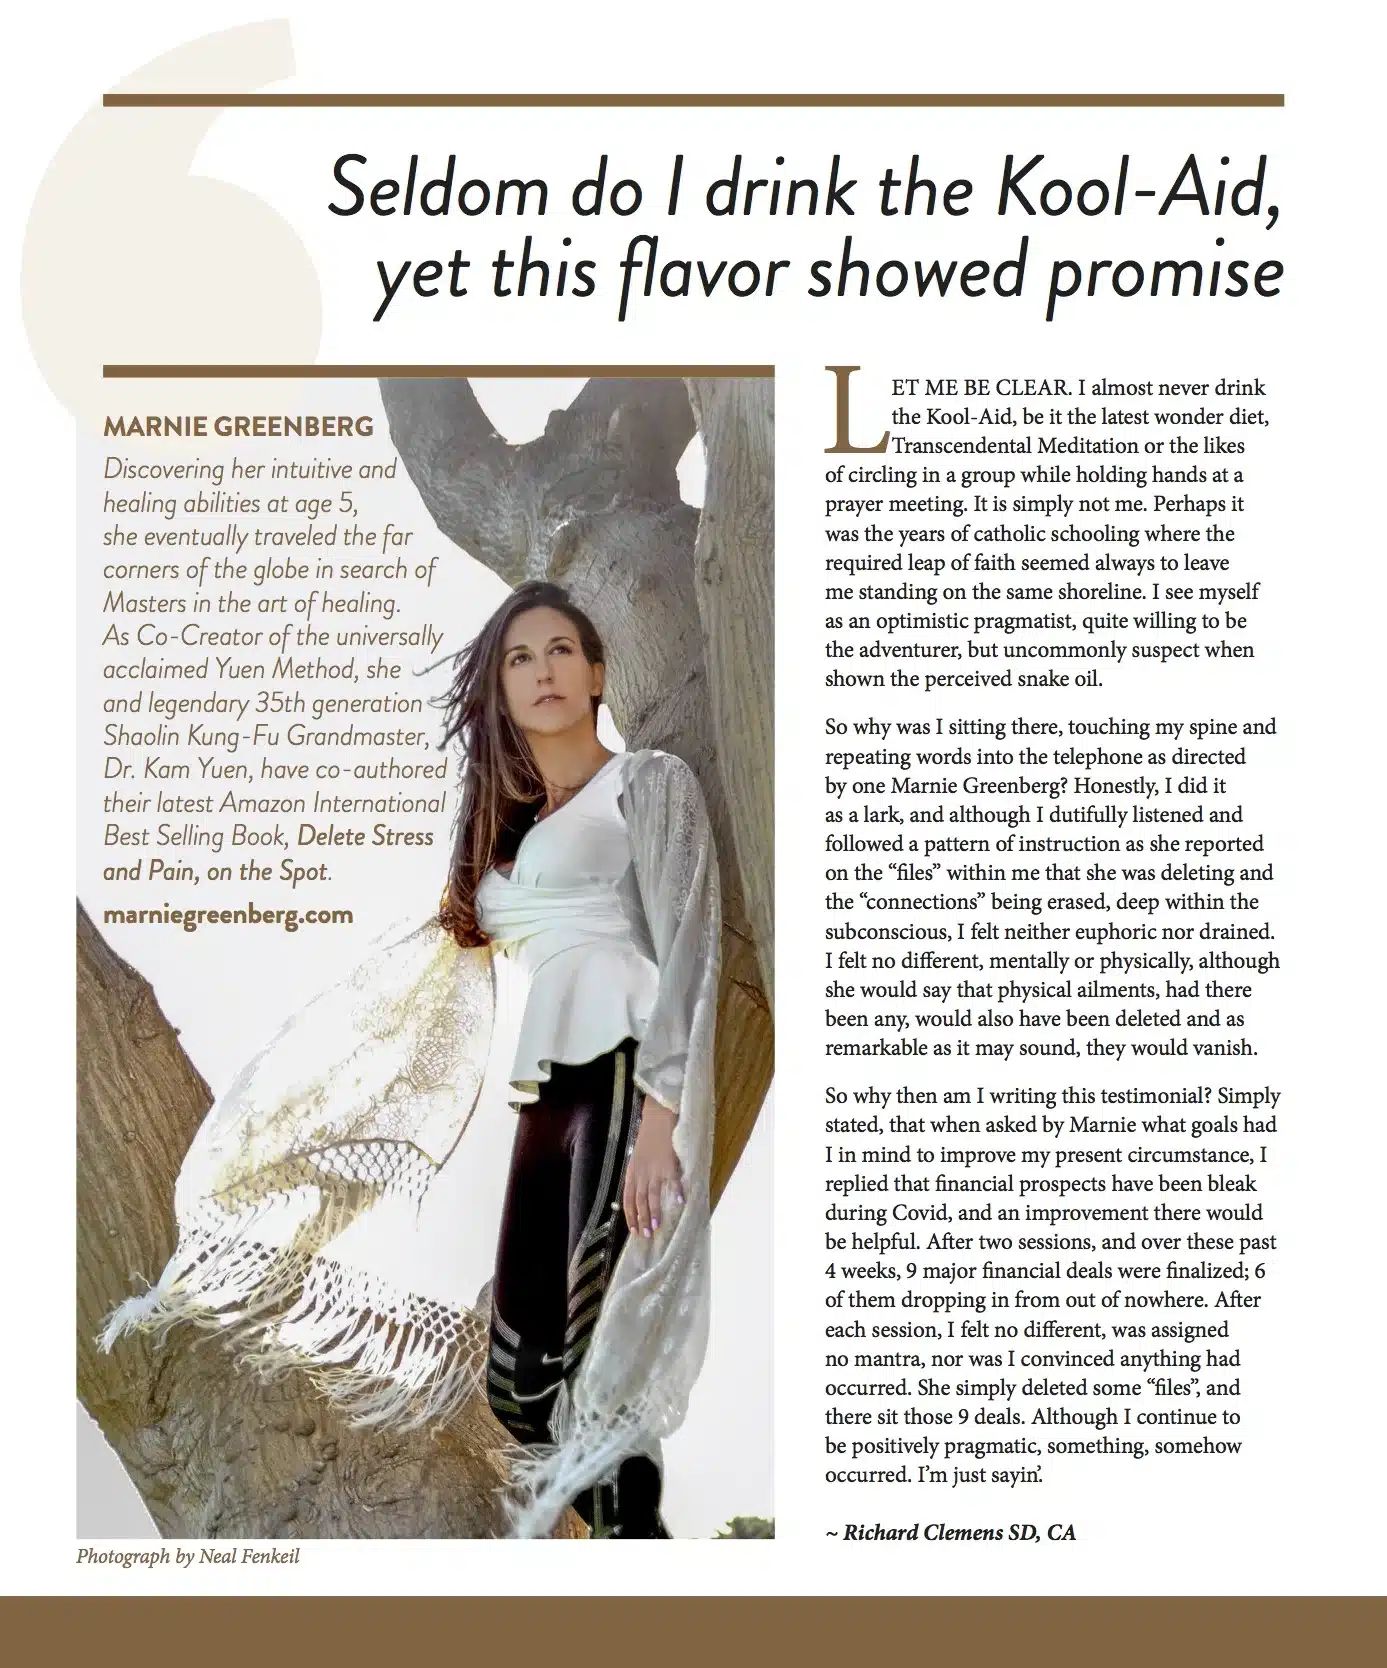 Marnie Greenberg article by Richard Clemmons in Discover magazine